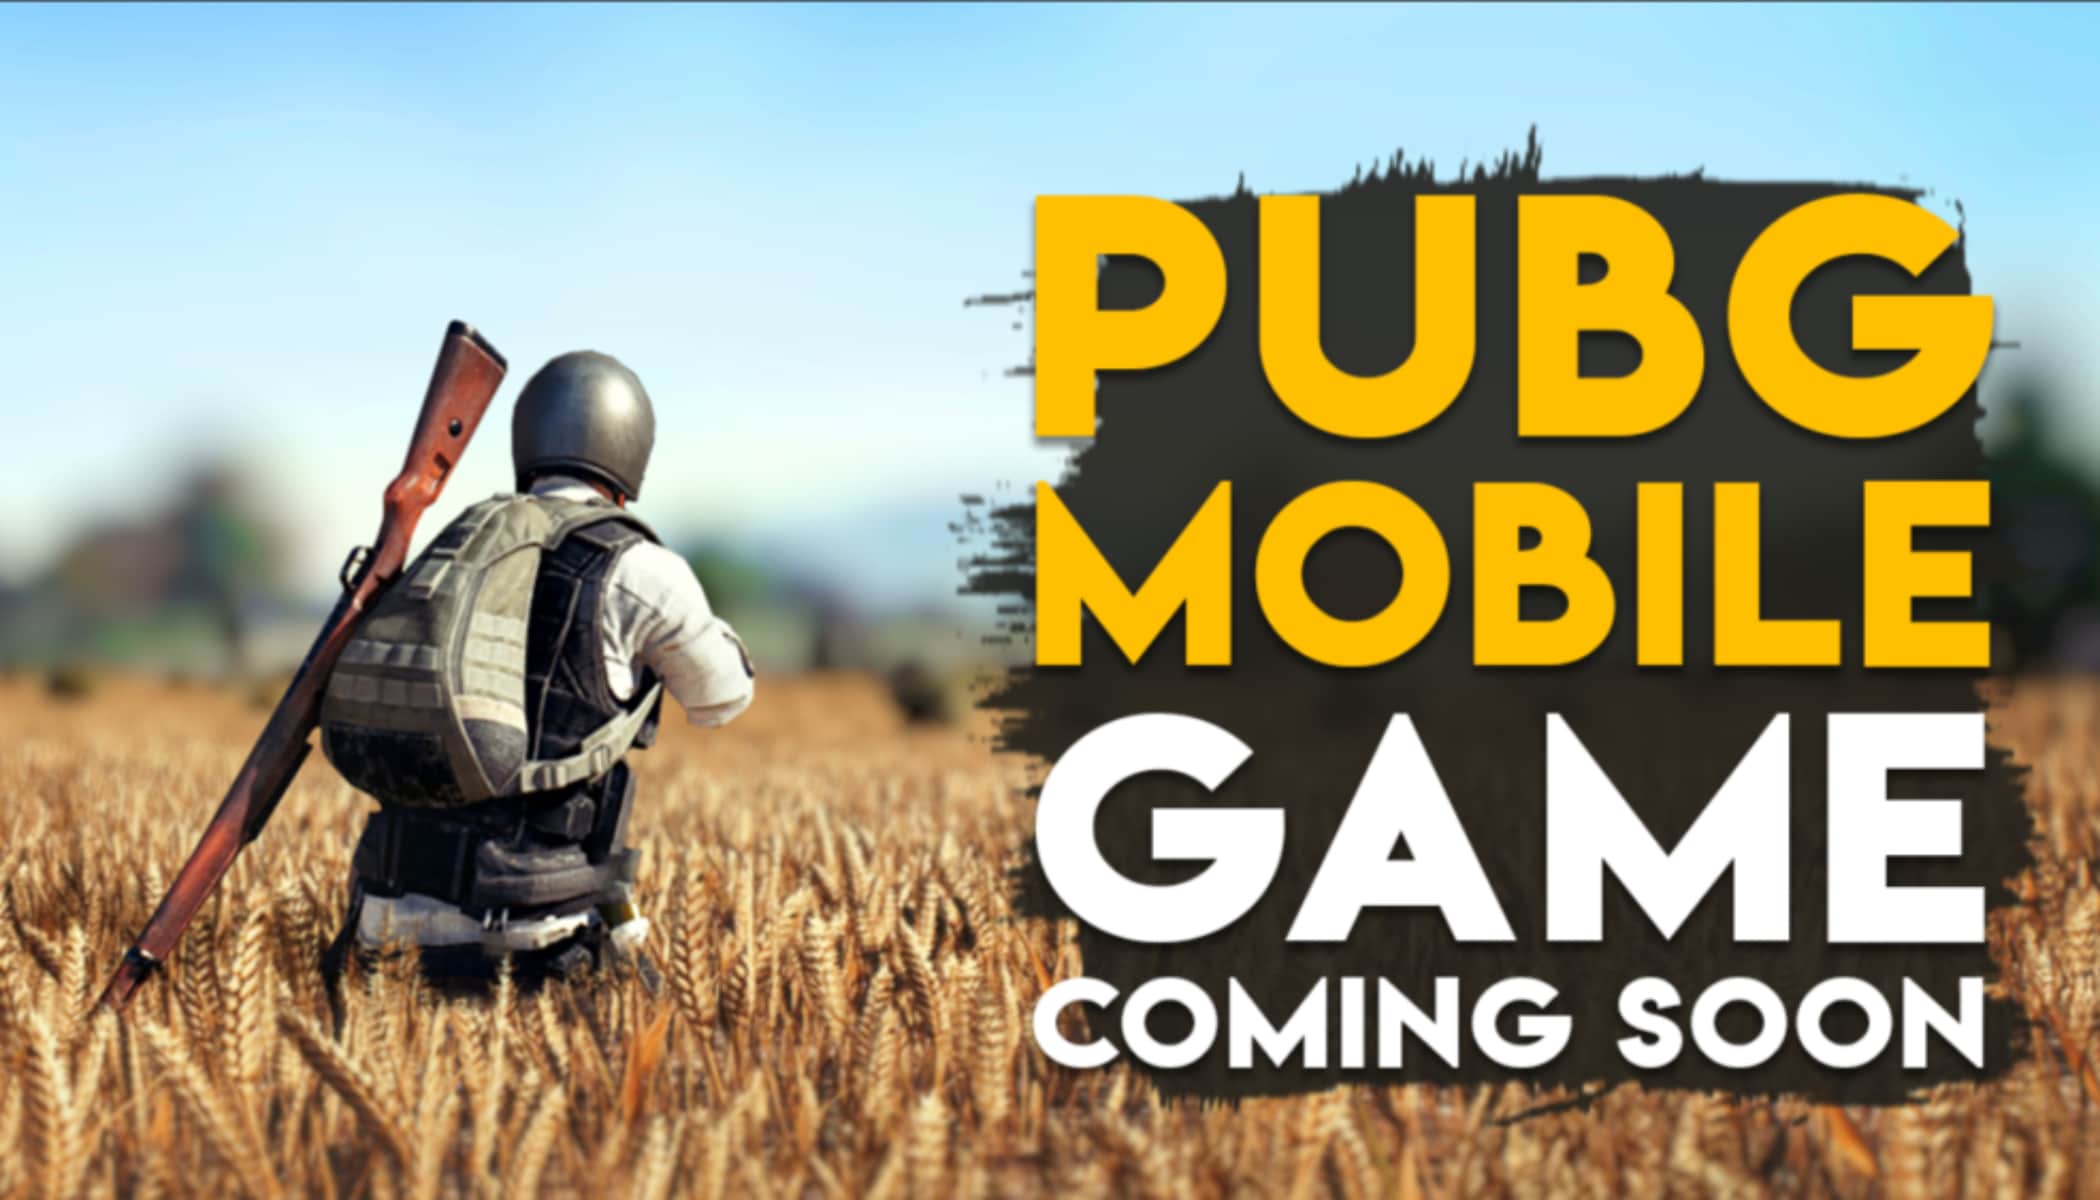 Upcoming New Version Of PUBG Mobile Specially Made For India